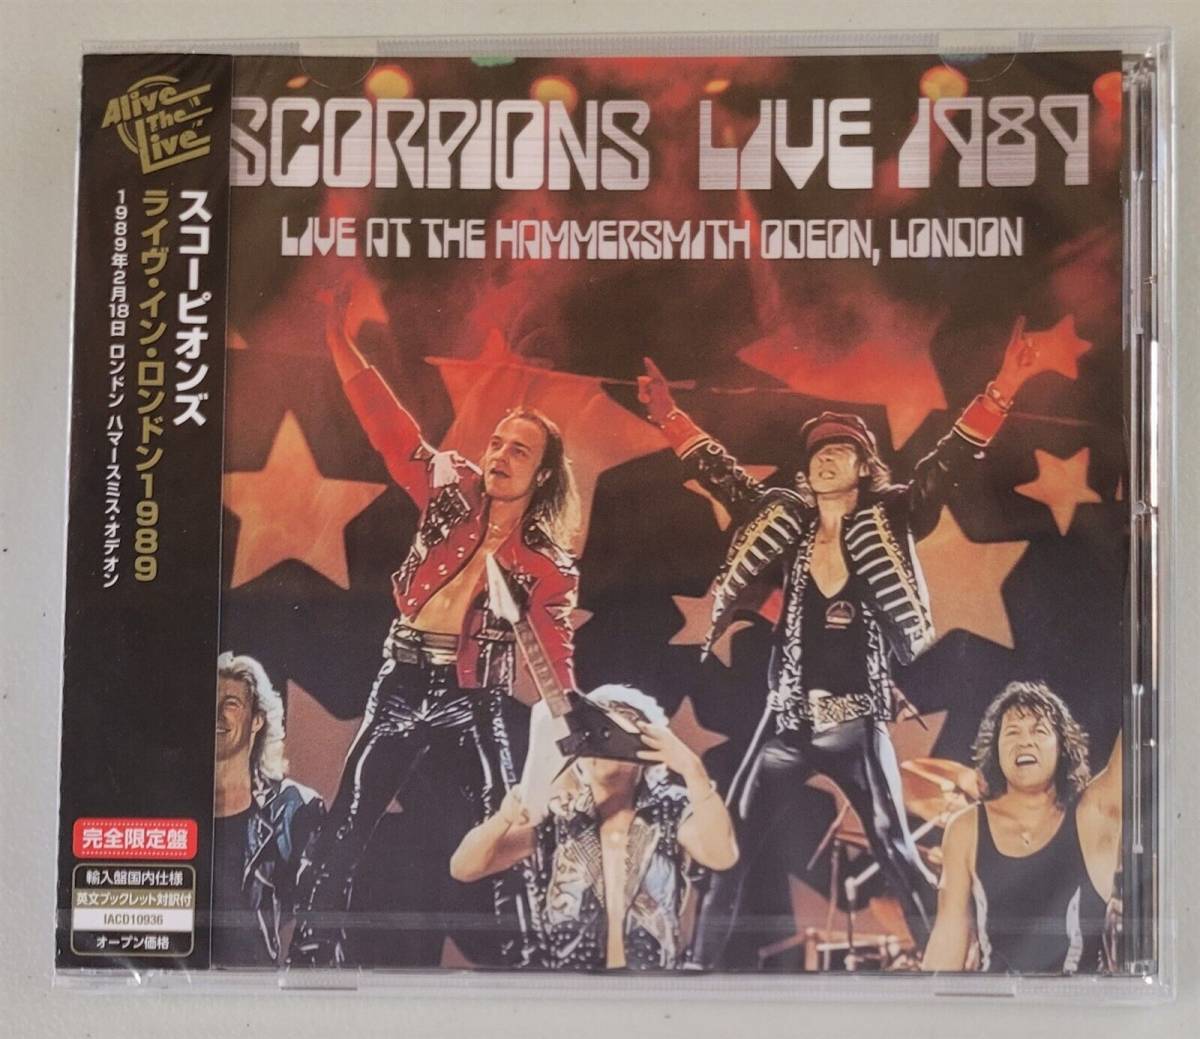 Scorpions Live 1989: Live At The Hammersmith Odeon, London Japan CD new 海外 即決